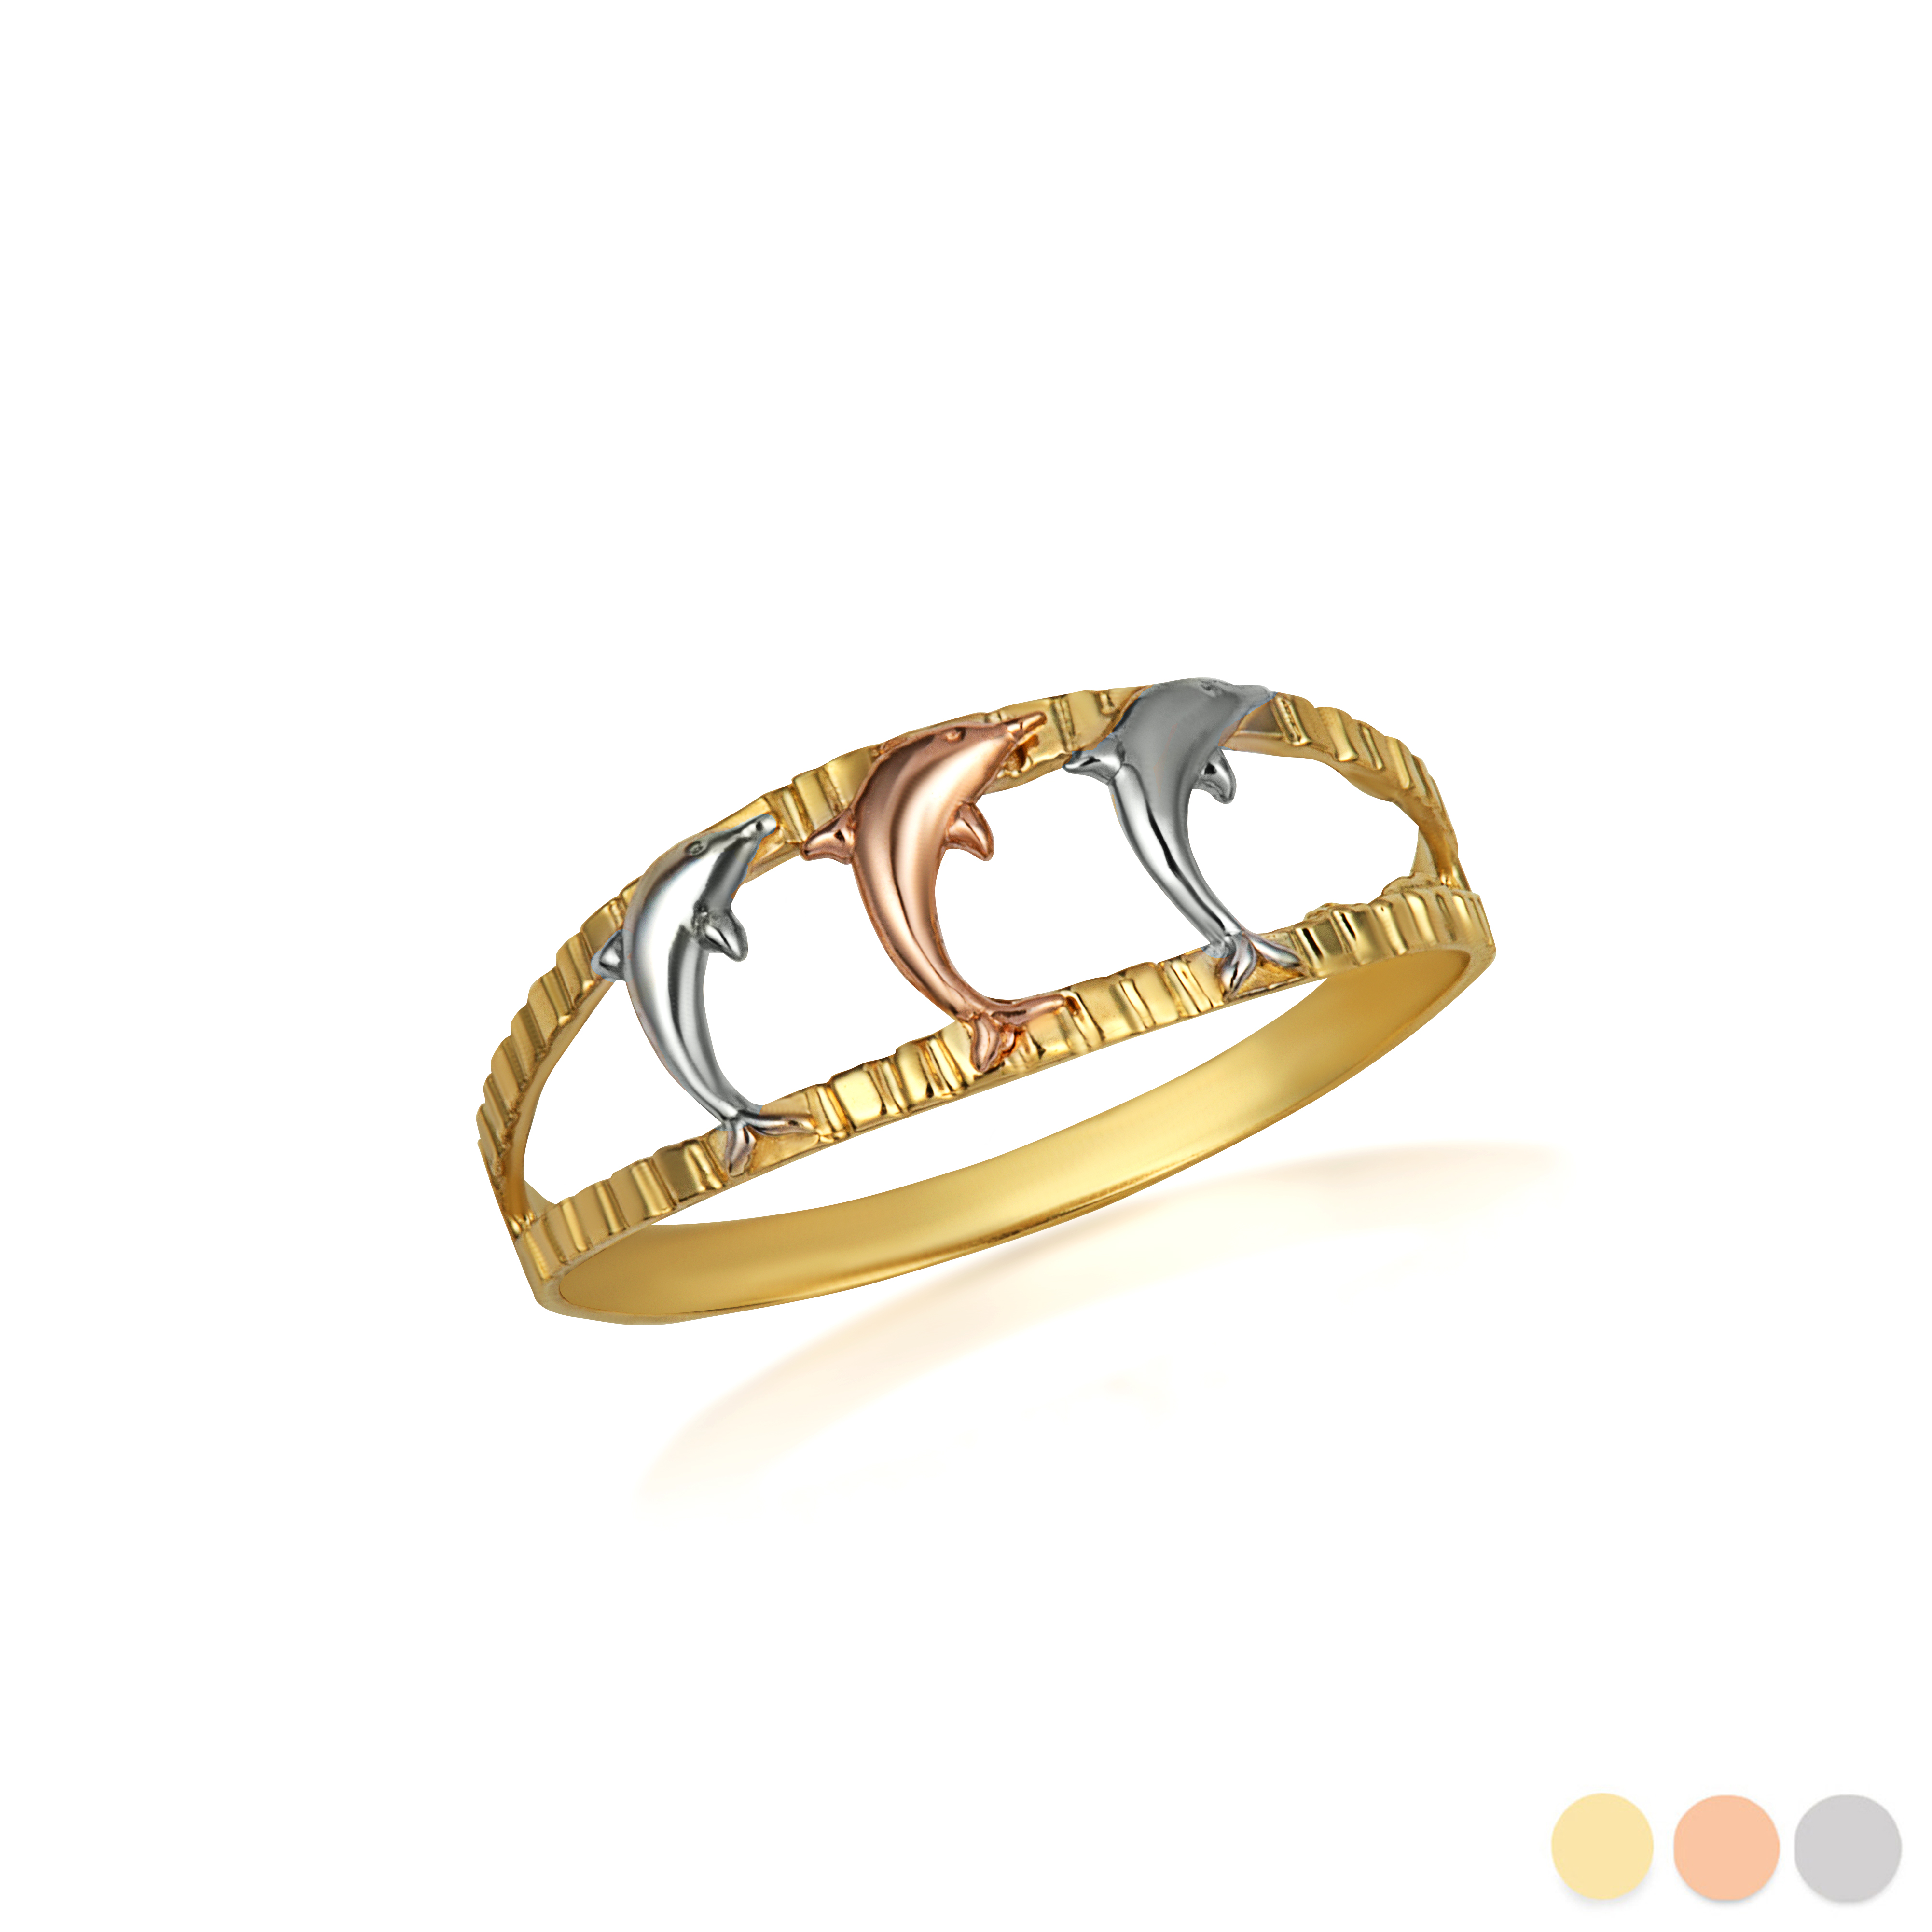 Dolphin With Cute Colored Tail 925 Sterling Silver Adjustable Women's Ring